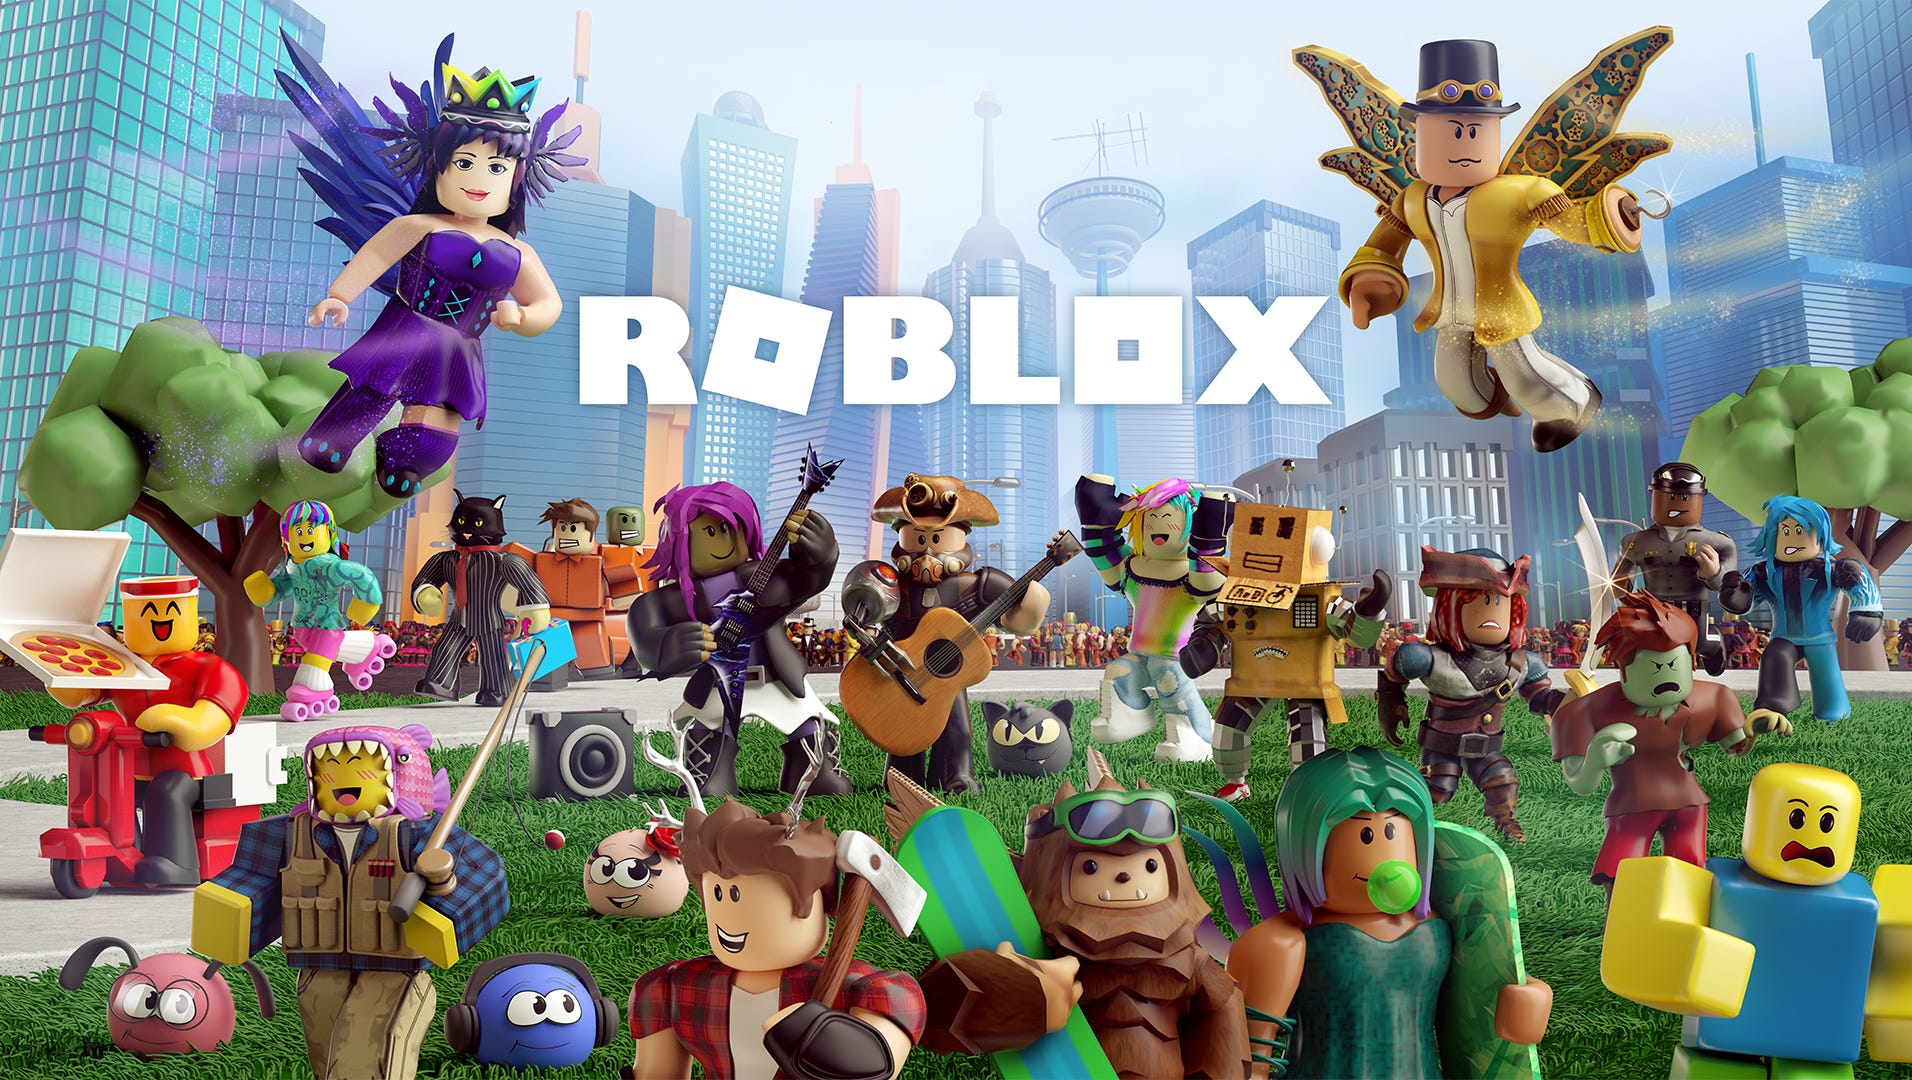 Roblox Kids Game Shows Character Being Sexually Violated Mom Warns - male roadblocks game roblox character